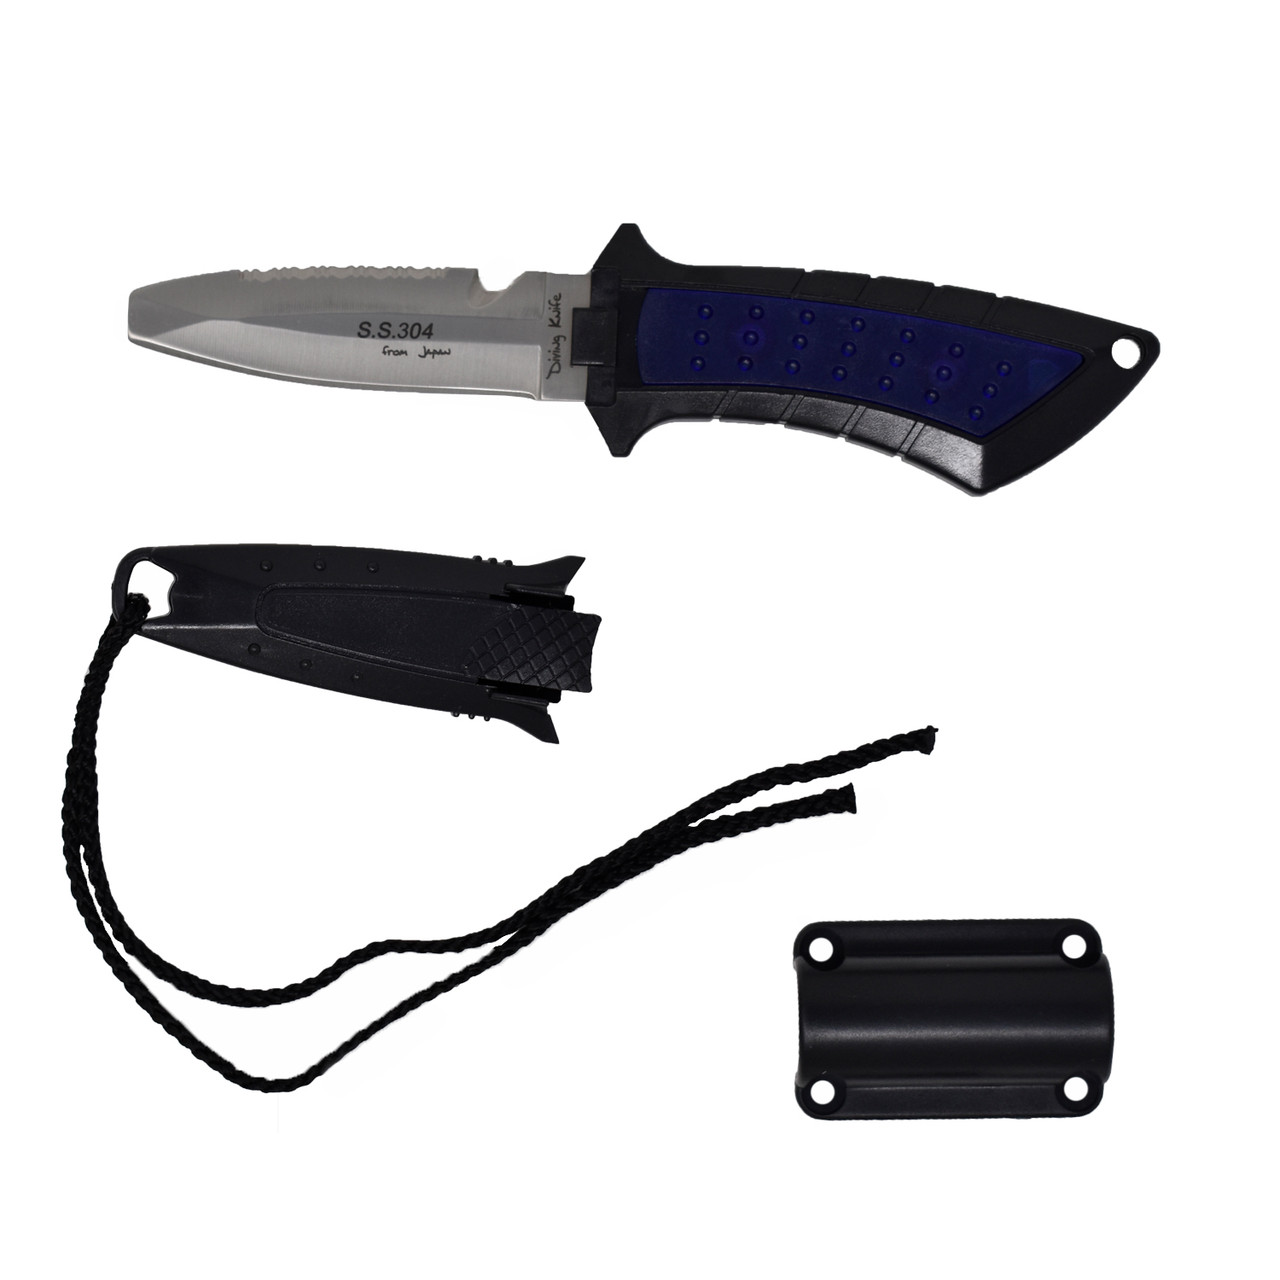 Scuba Choice Spearfishing Low Volume Point-Tip Sharp Dive Knife